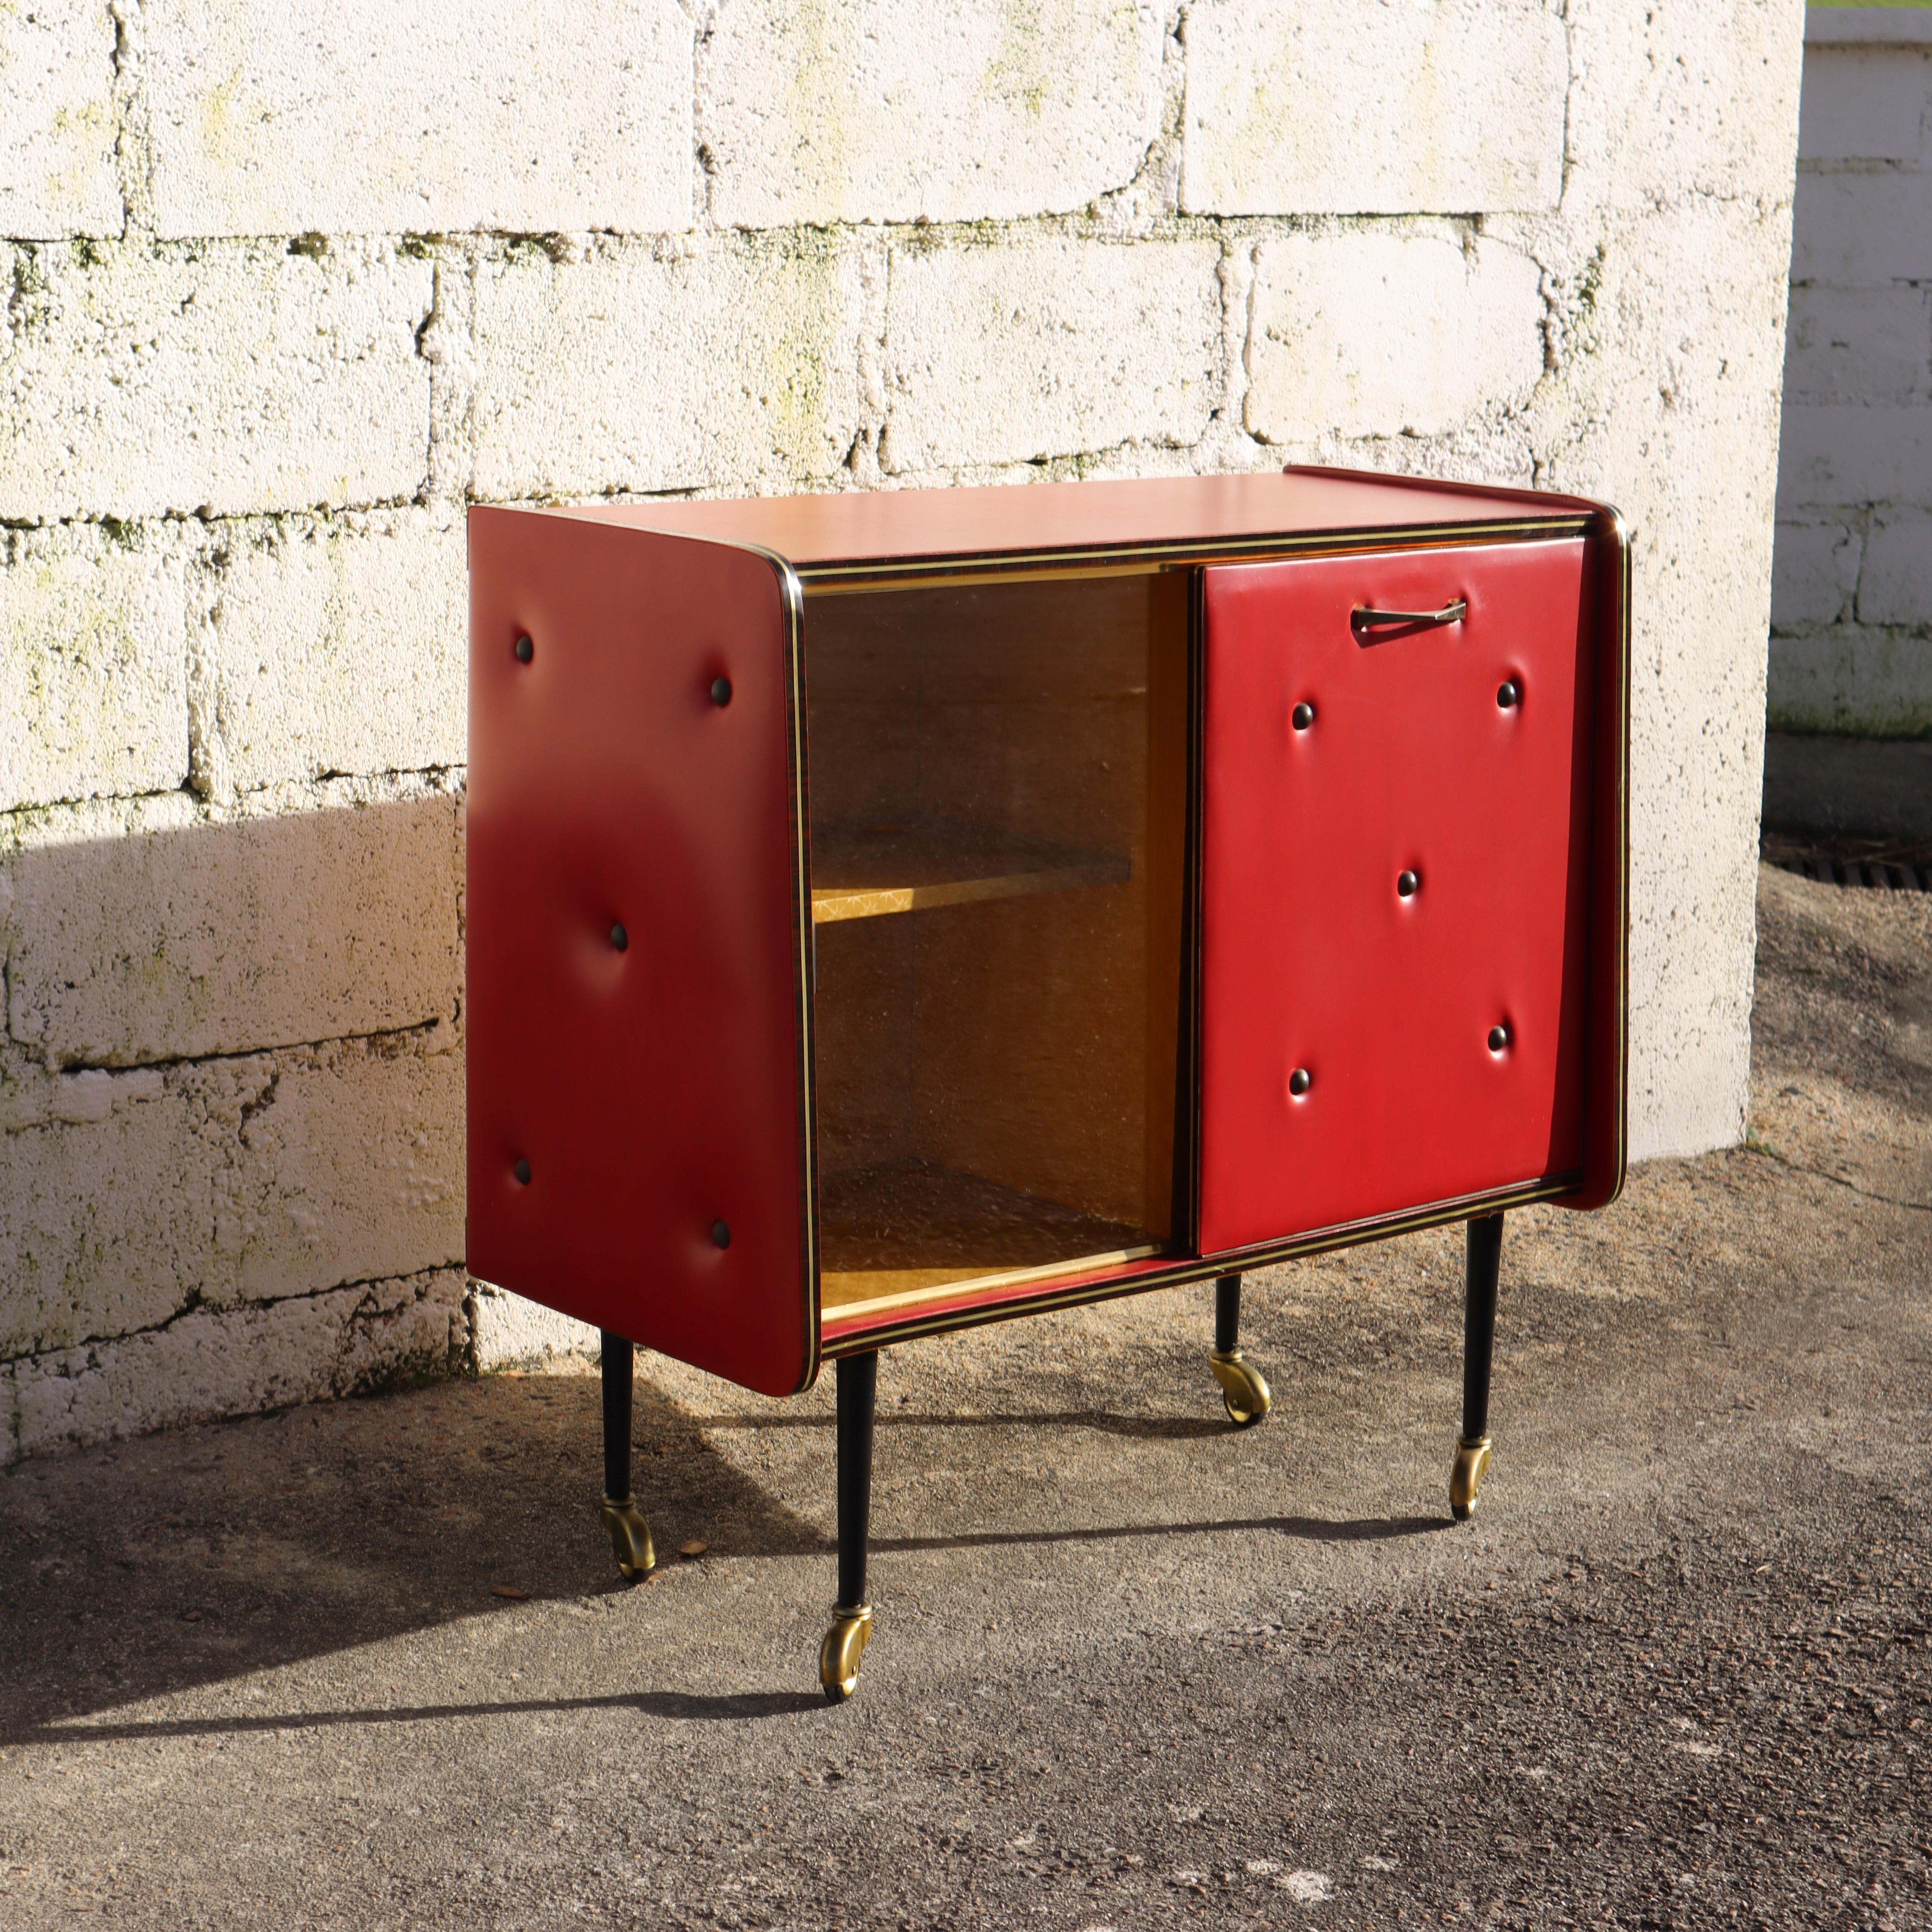 Rare Beautiful Mid-Century upholstered red Skai Leather Bar Trolley from the 50s
Real Mid-Century - Handmade mobile Bar - Sides and Front made of thickly padded Faux Leather in Chesterfield Style.

The interior of the bar cart is lined with very